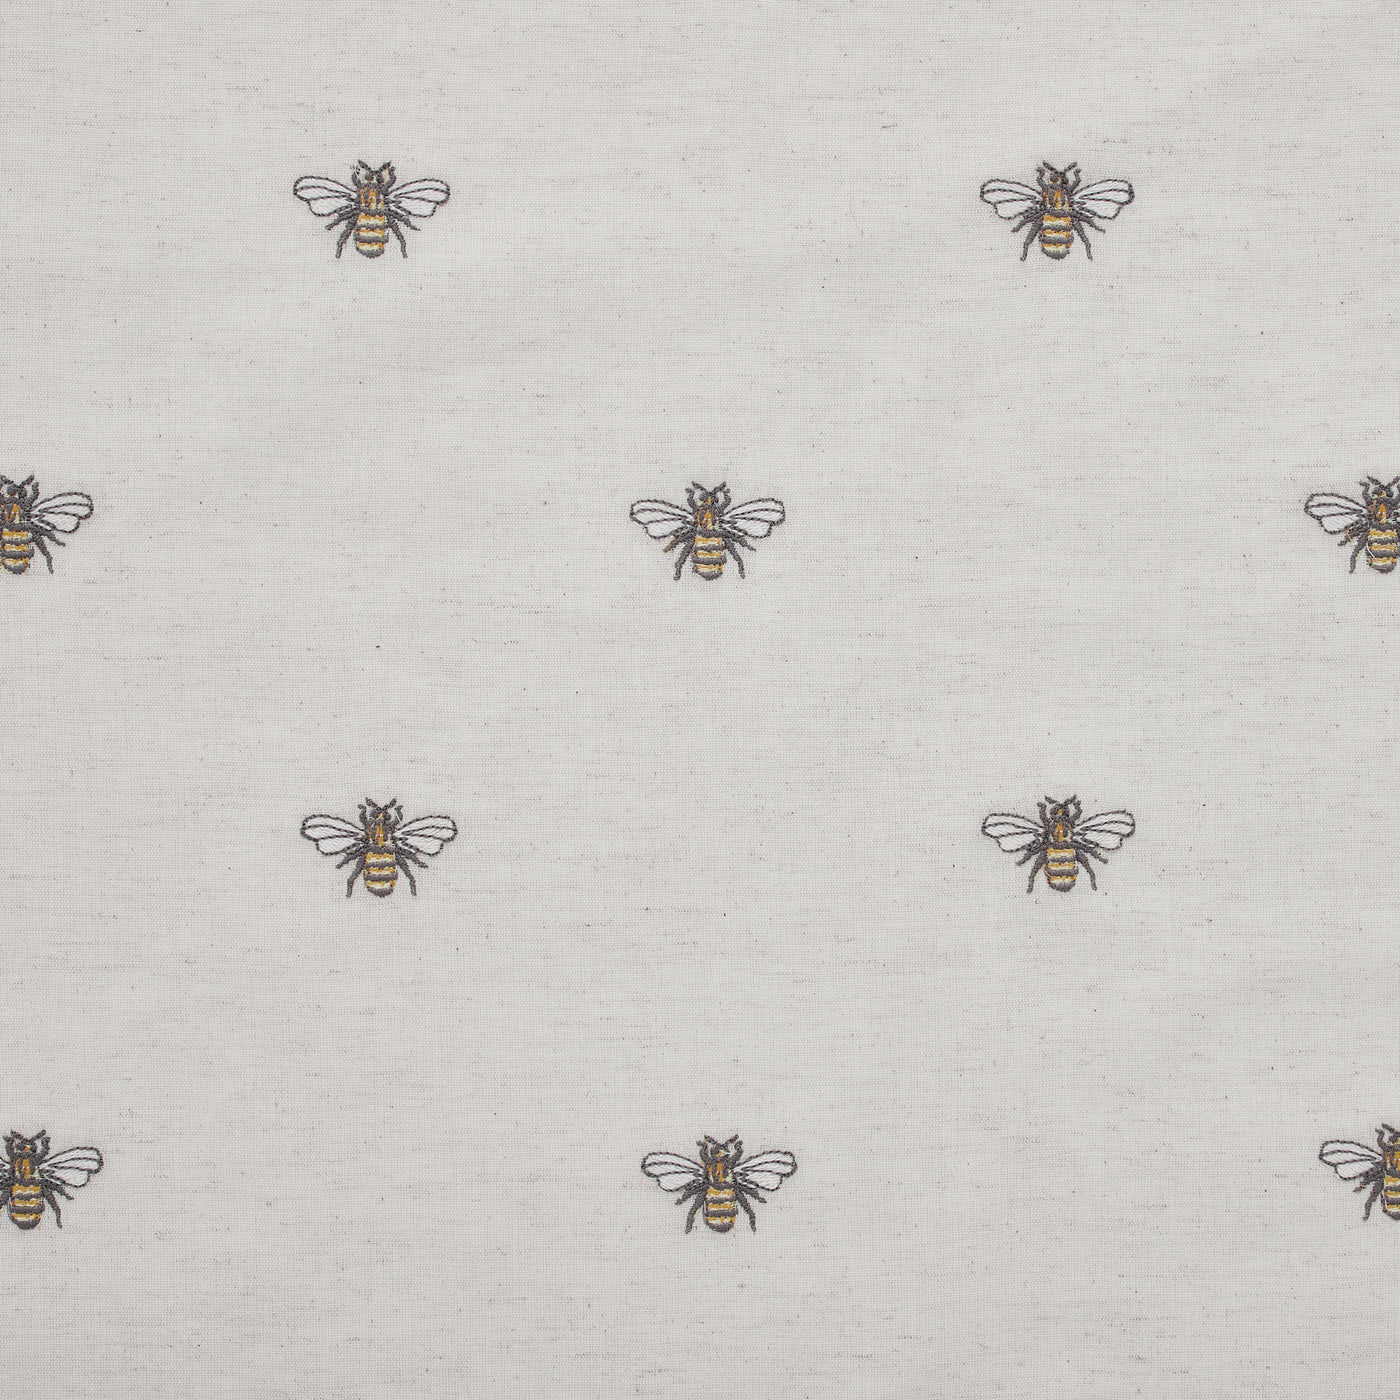 Set of 6 Embroidered Bee Placemats